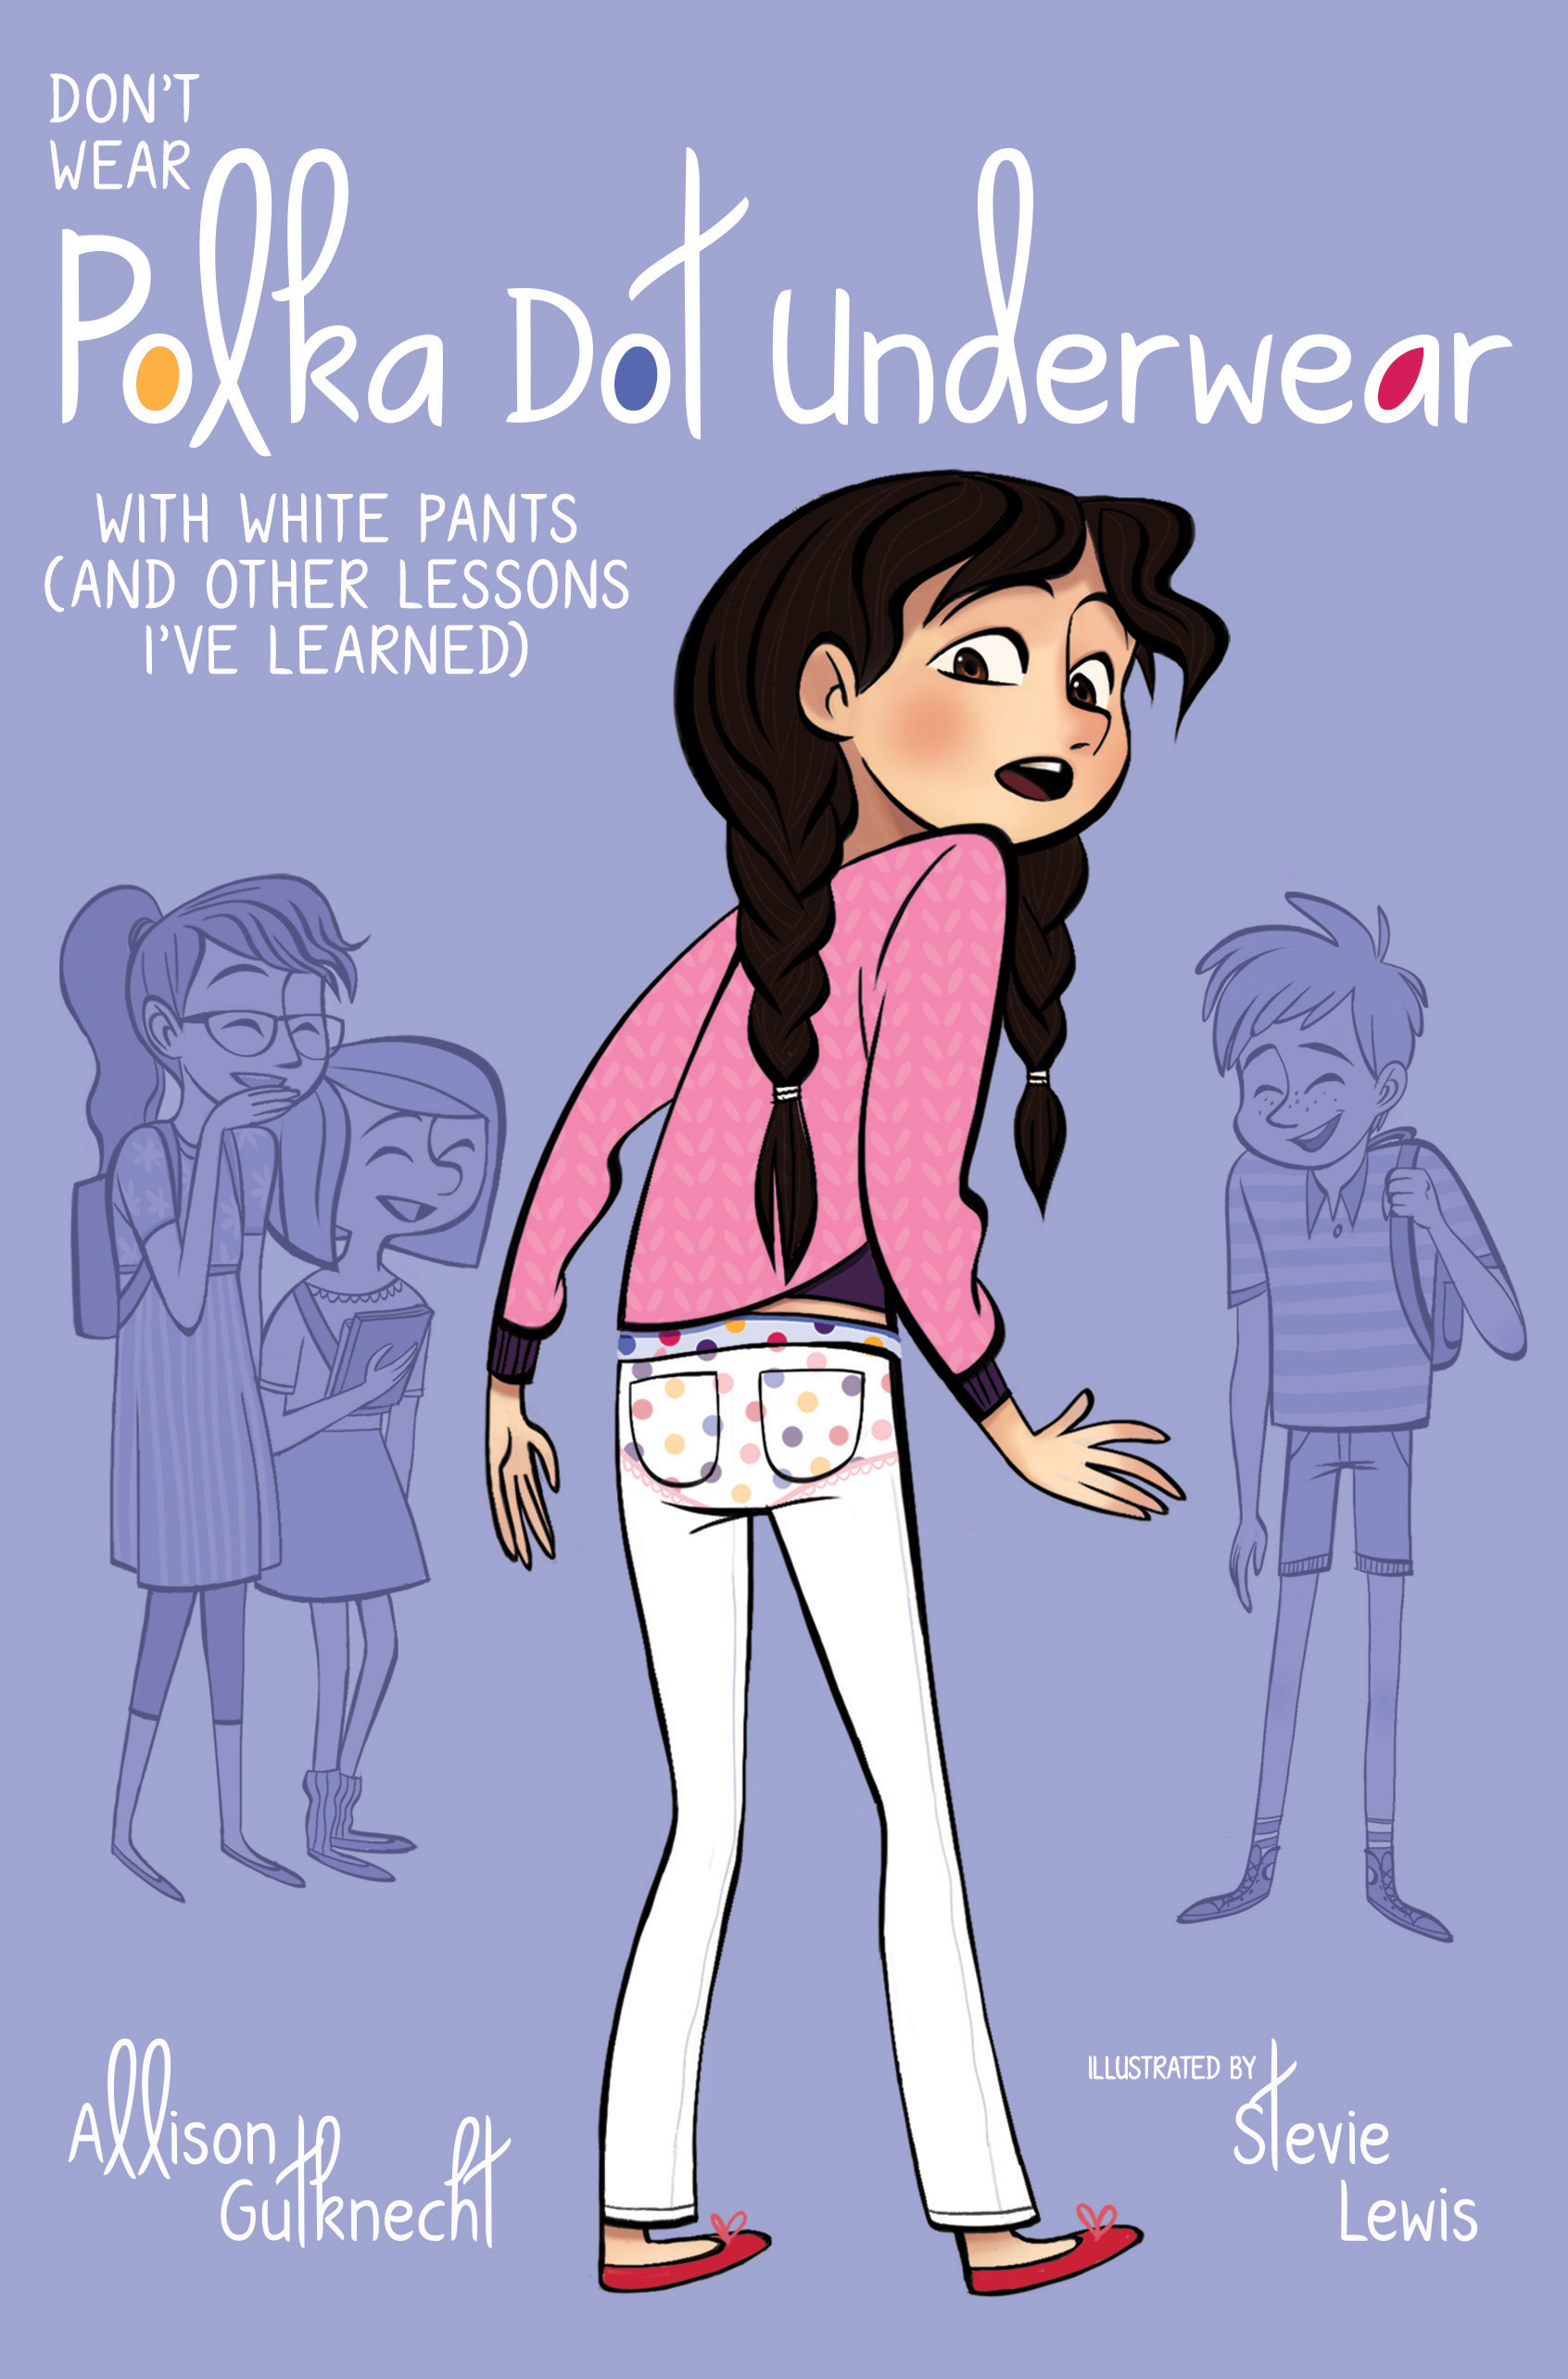 Don’t Wear Polka Dot Underwear with White Pants (And Other Lessons I’ve Learned)